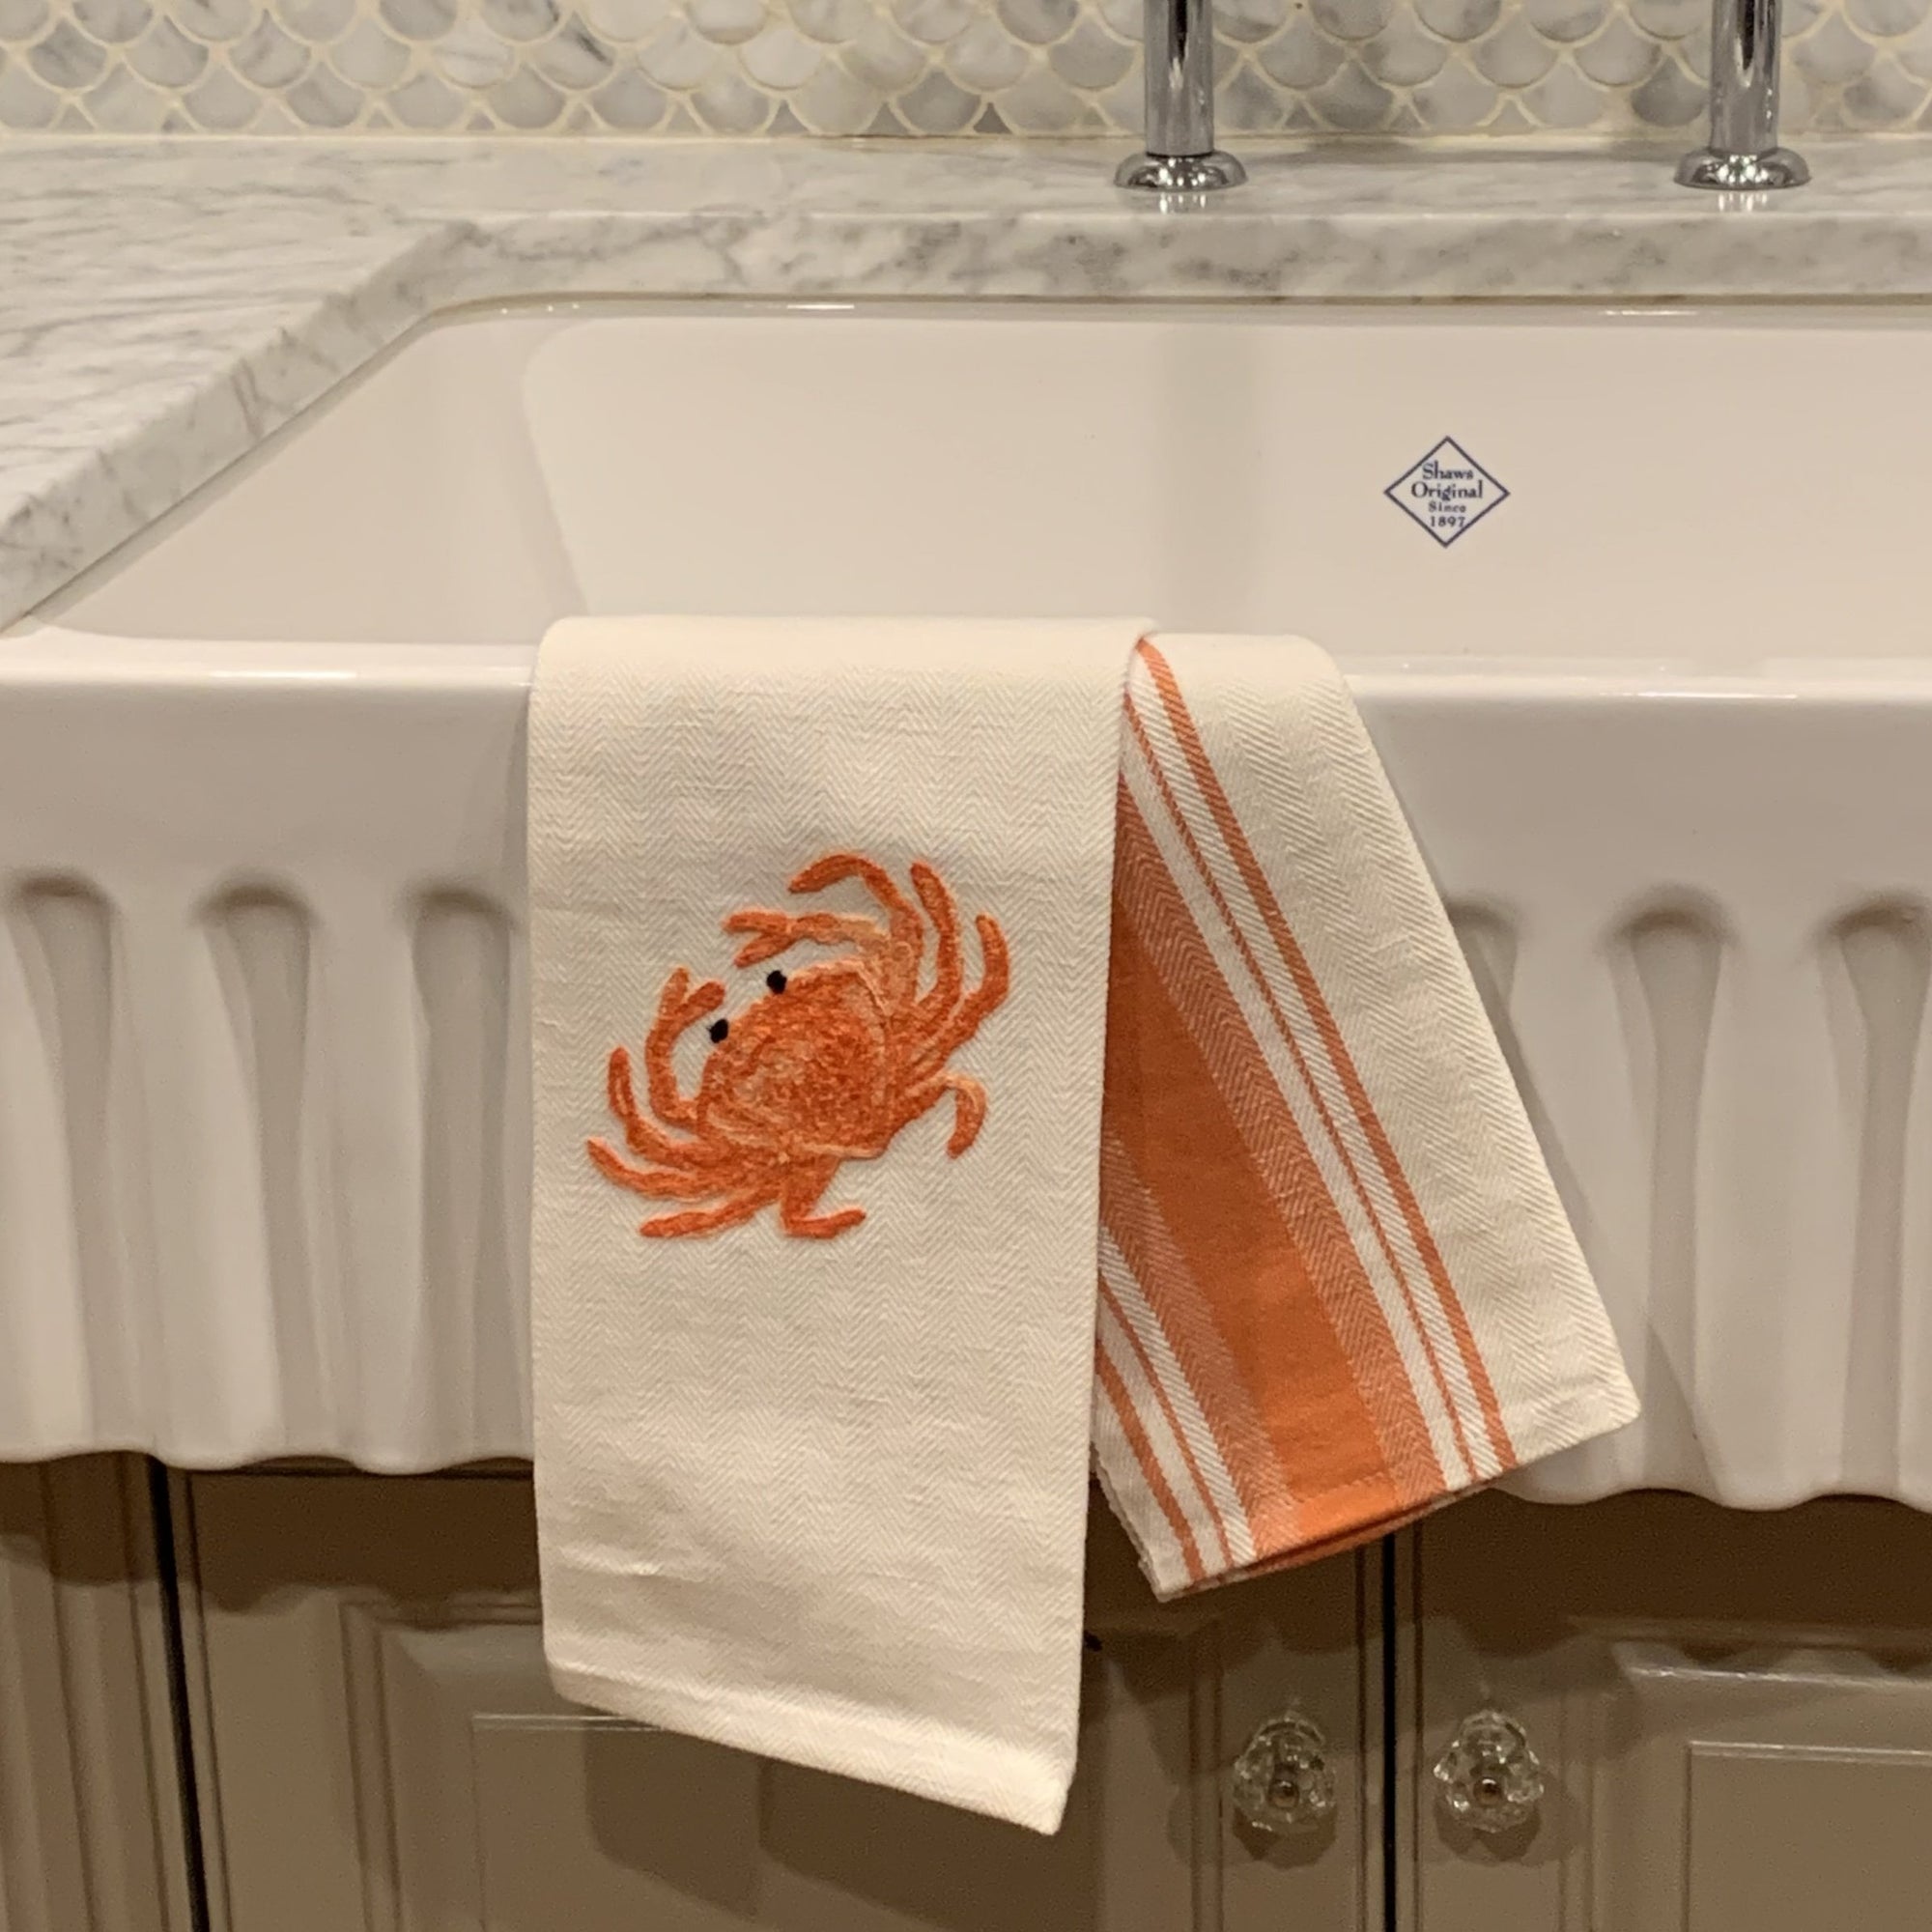 Dungeness Crab “Granchi” Fragole Kitchen Towel Made in Itay Timothy De Clue Collection Puget Sound Crab